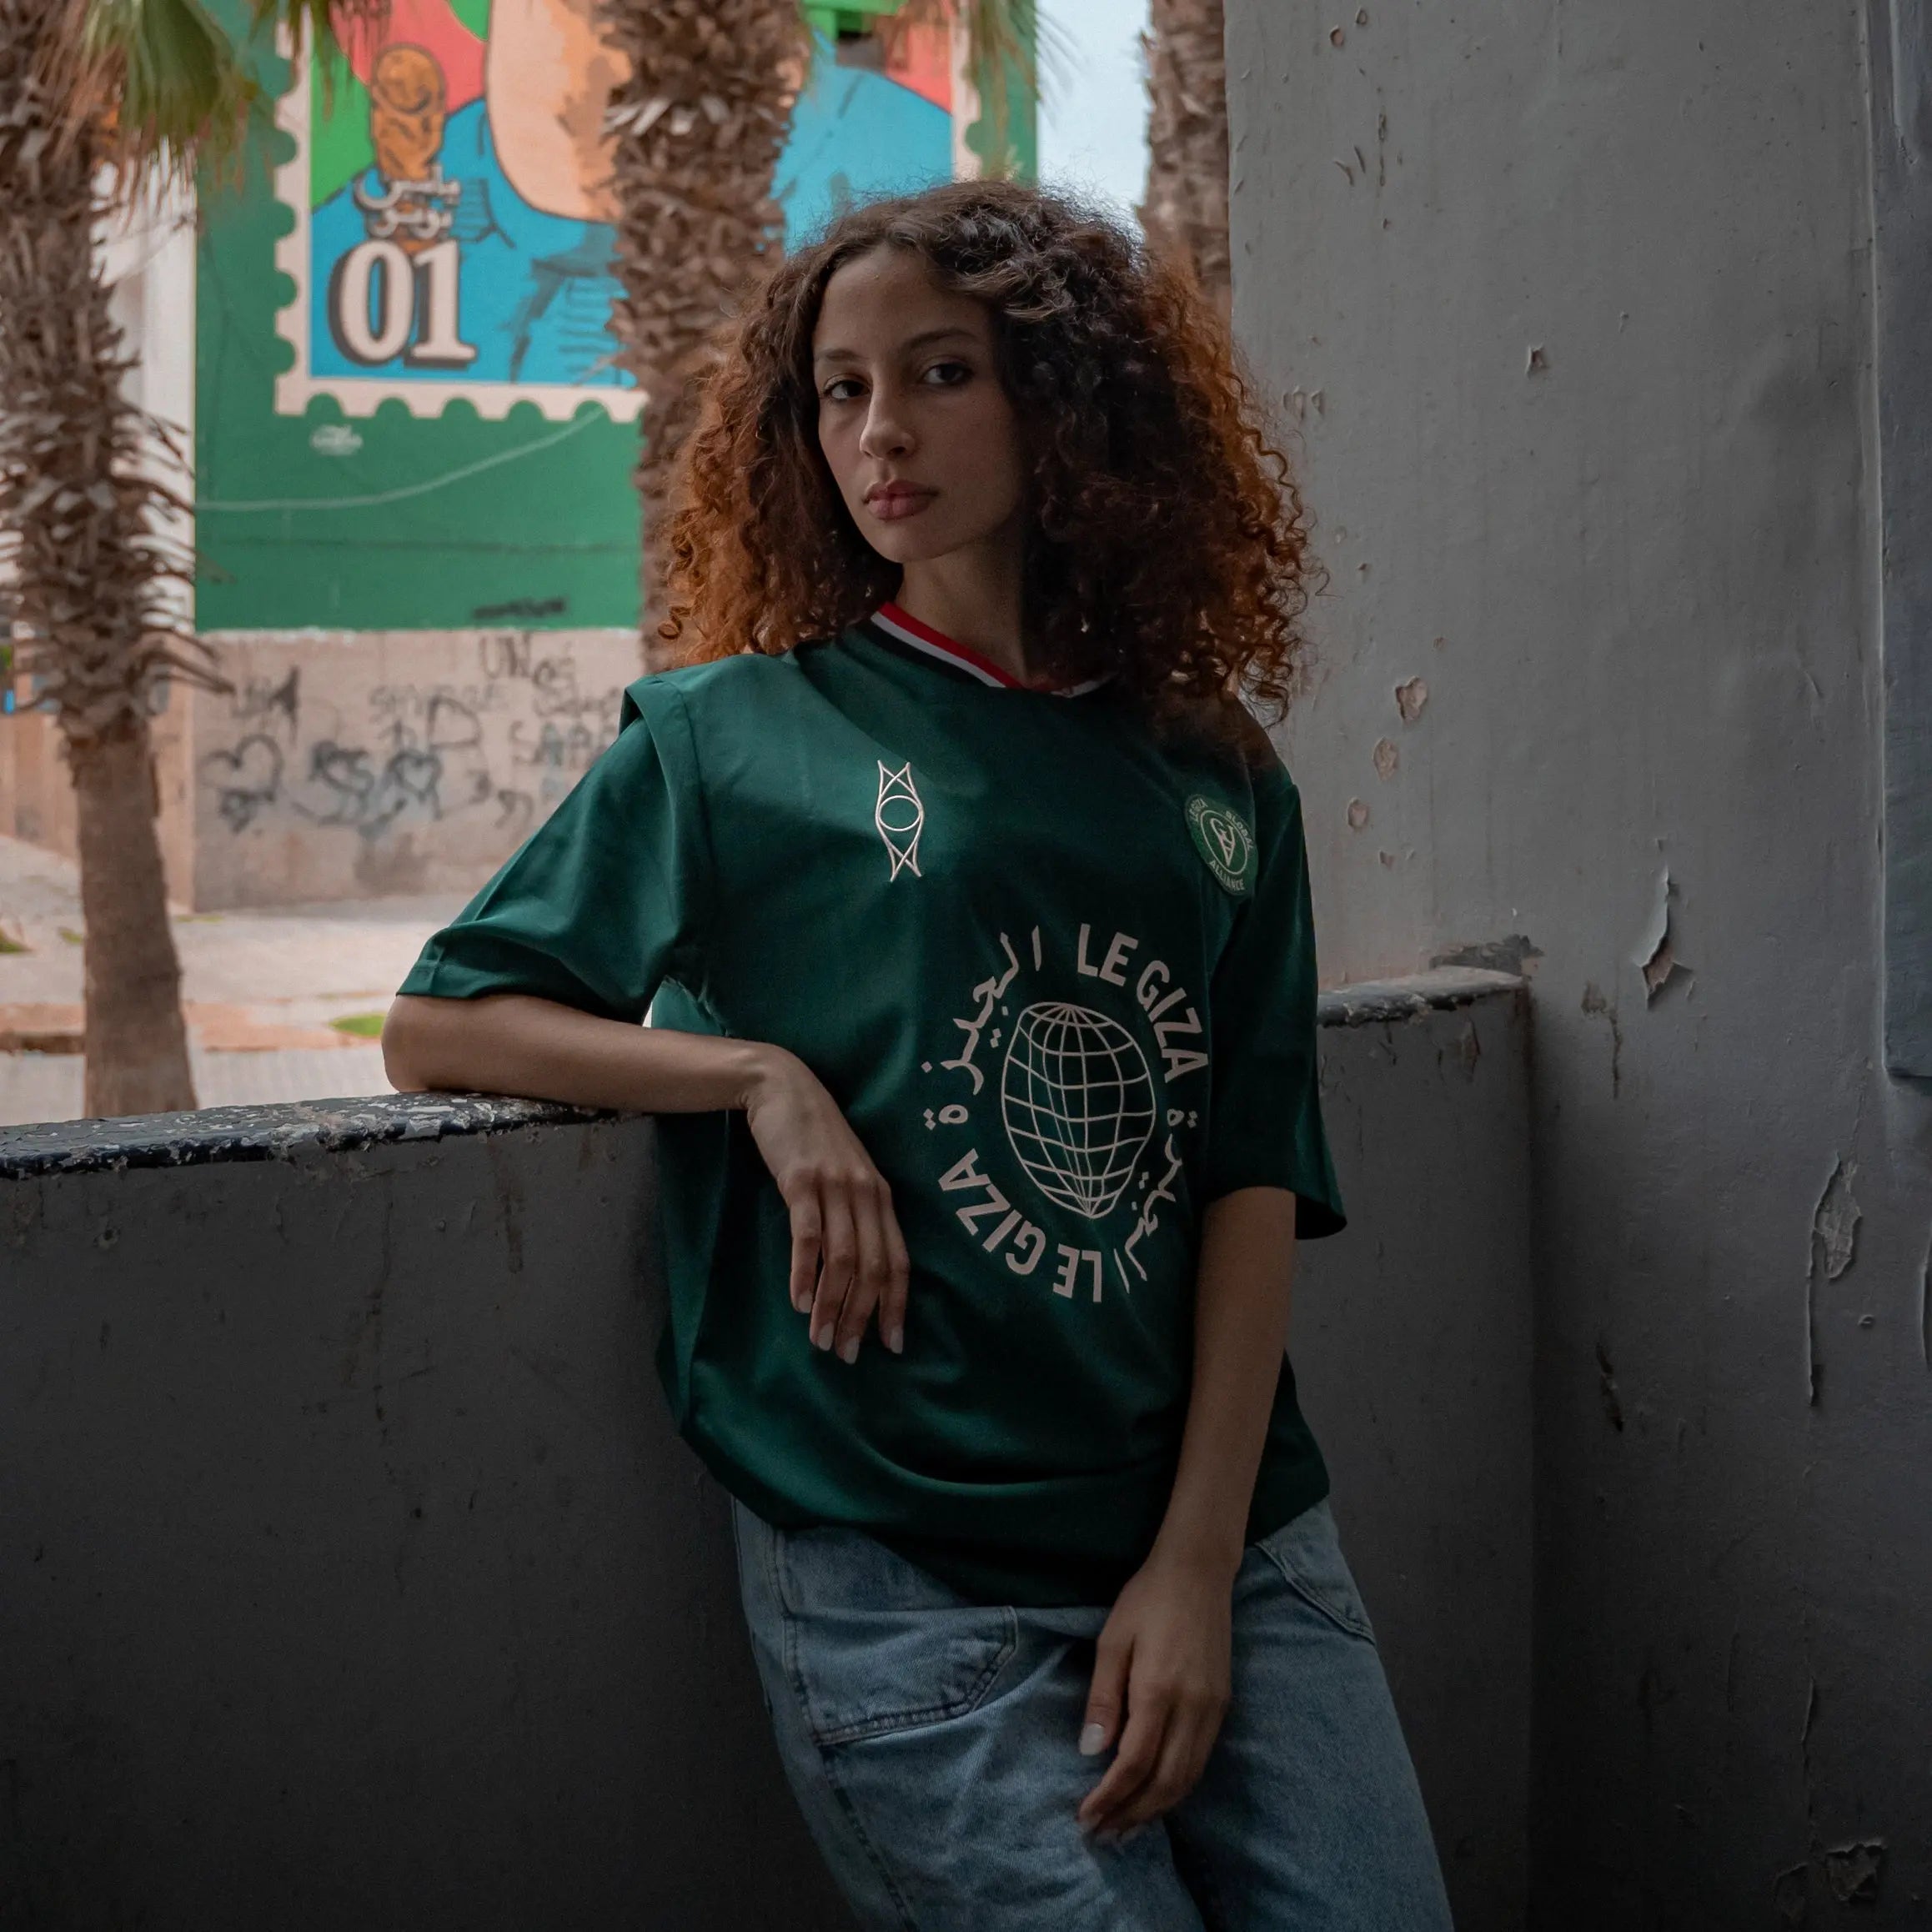 Fatma, 162cm tall, wearing a size Small of the Dark Green Le Giza Football Jersey.